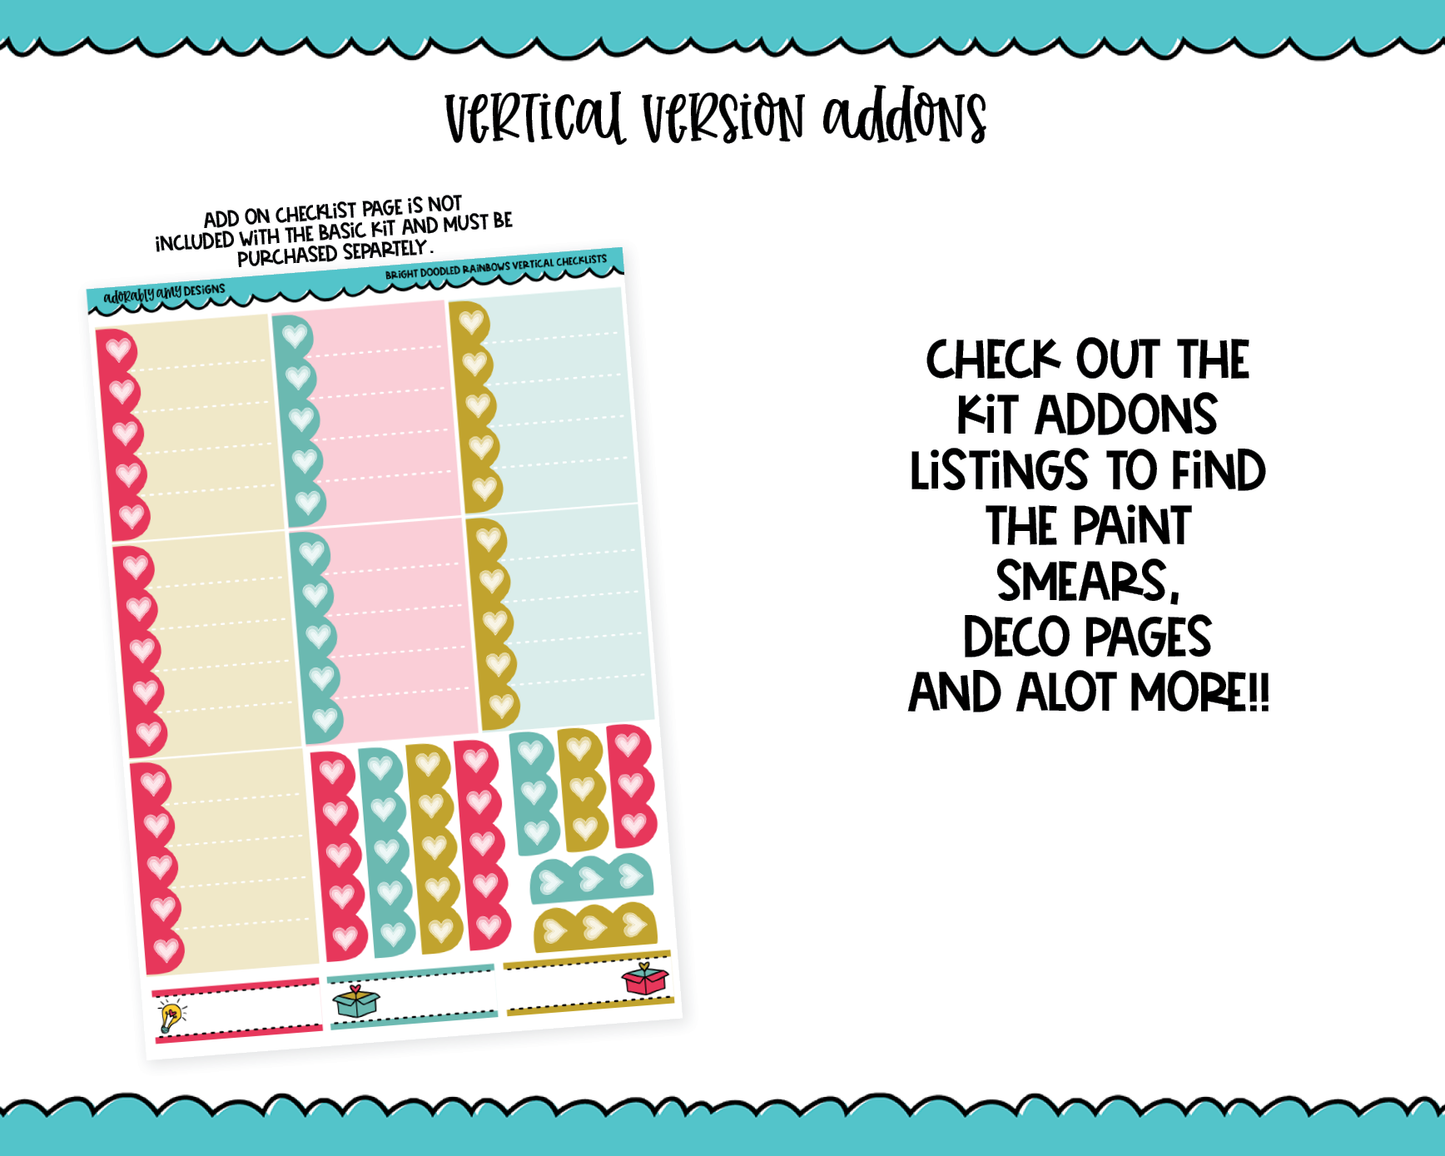 Vertical Bright Doodled Rainbows Summer Themed Planner Sticker Kit for Vertical Standard Size Planners or Inserts